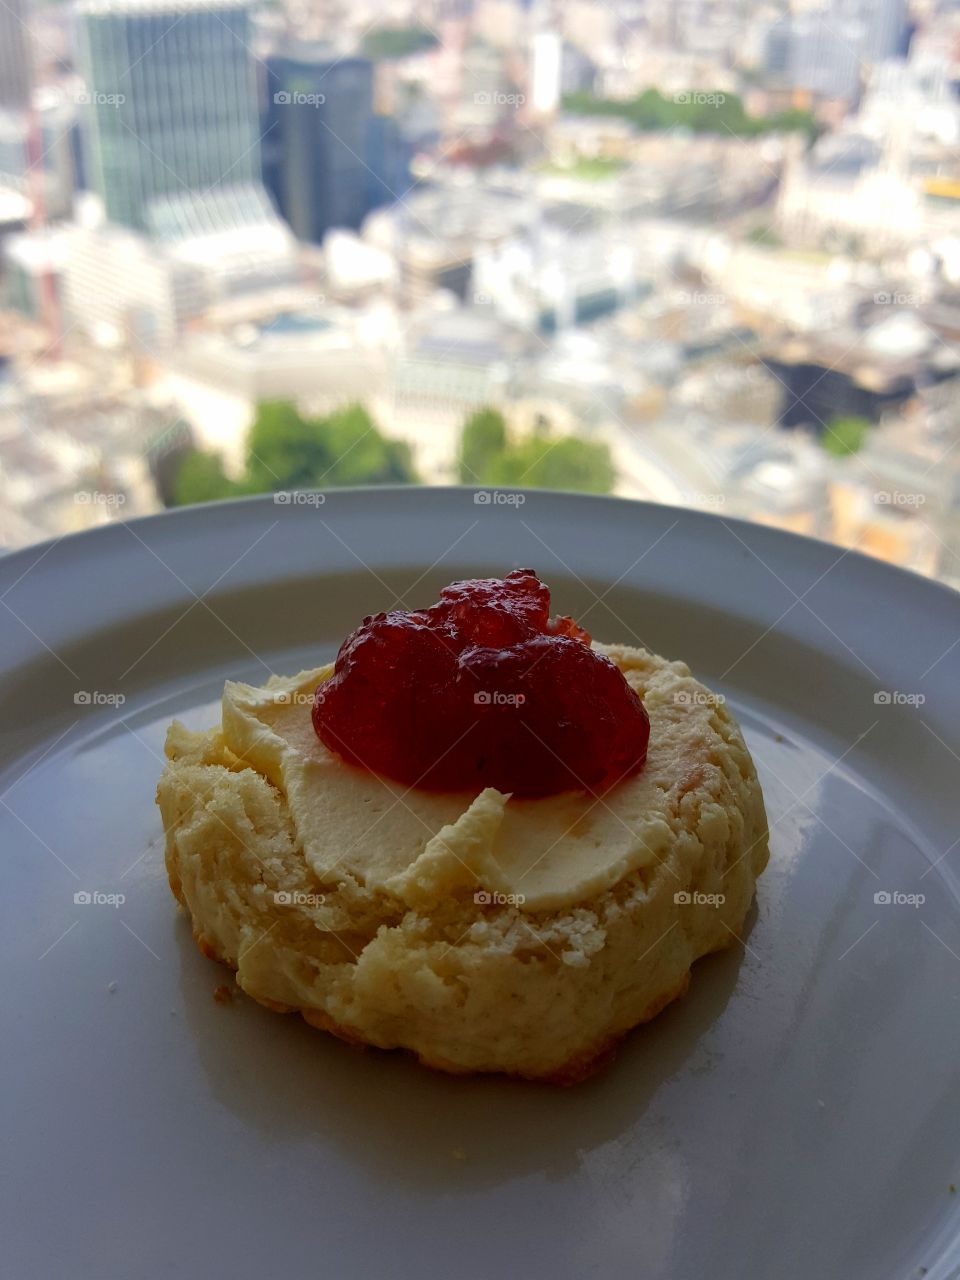 Afternoon scone with a view